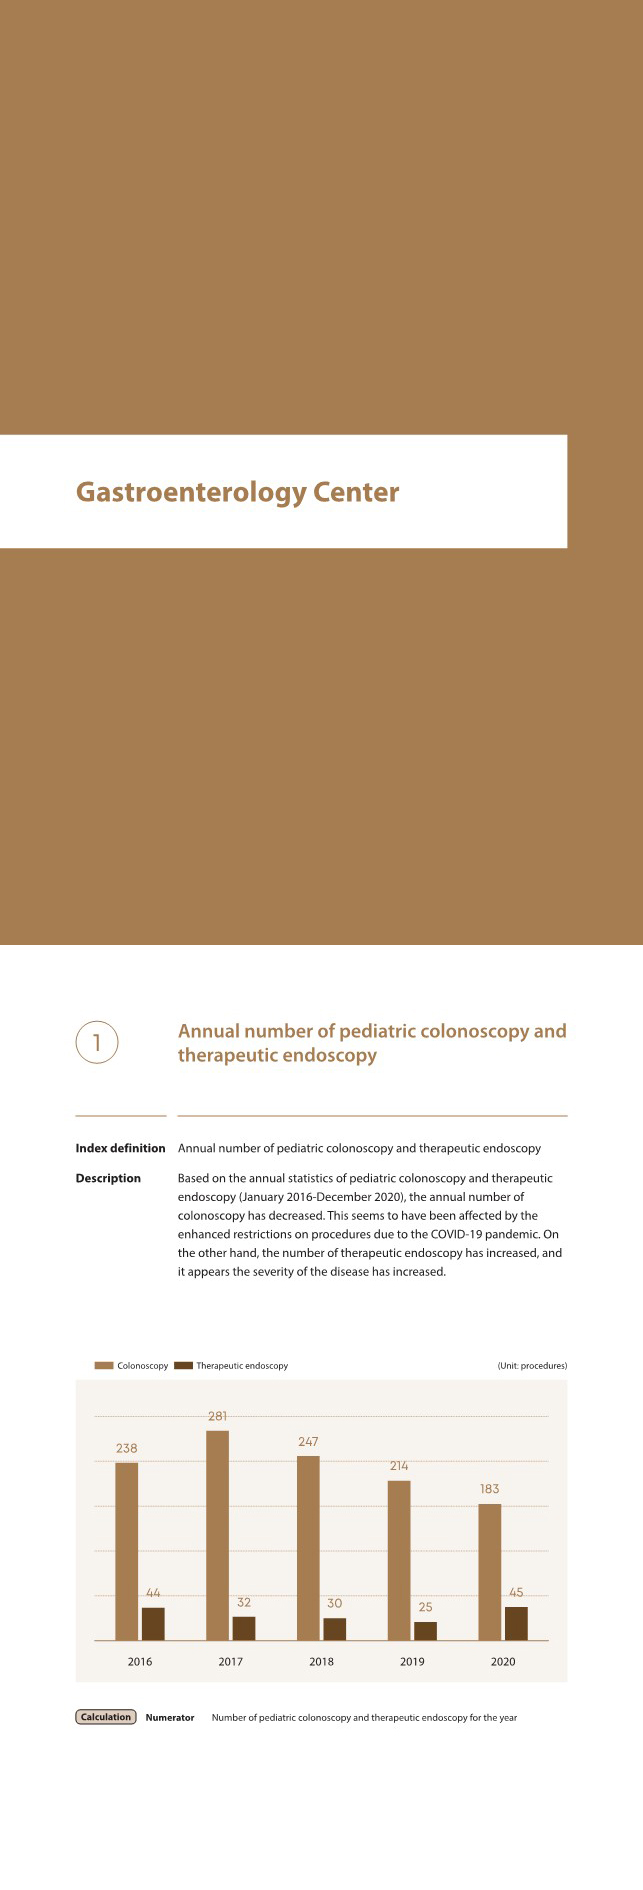 Gastroenterology Center, Annual number of pediatric colonoscopy and therapeutic endoscopy, Based on the annual statistics of pediatric colonoscopy and therapeutic endoscopy (January 2016-December 2020), the annual number of colonoscopy has decreased. This seems to have been affected by the enhanced restrictions on procedures due to the COVID-19 pandemic. On the other hand, the number of therapeutic endoscopy has increased, and it appears the severity of the disease has increased.